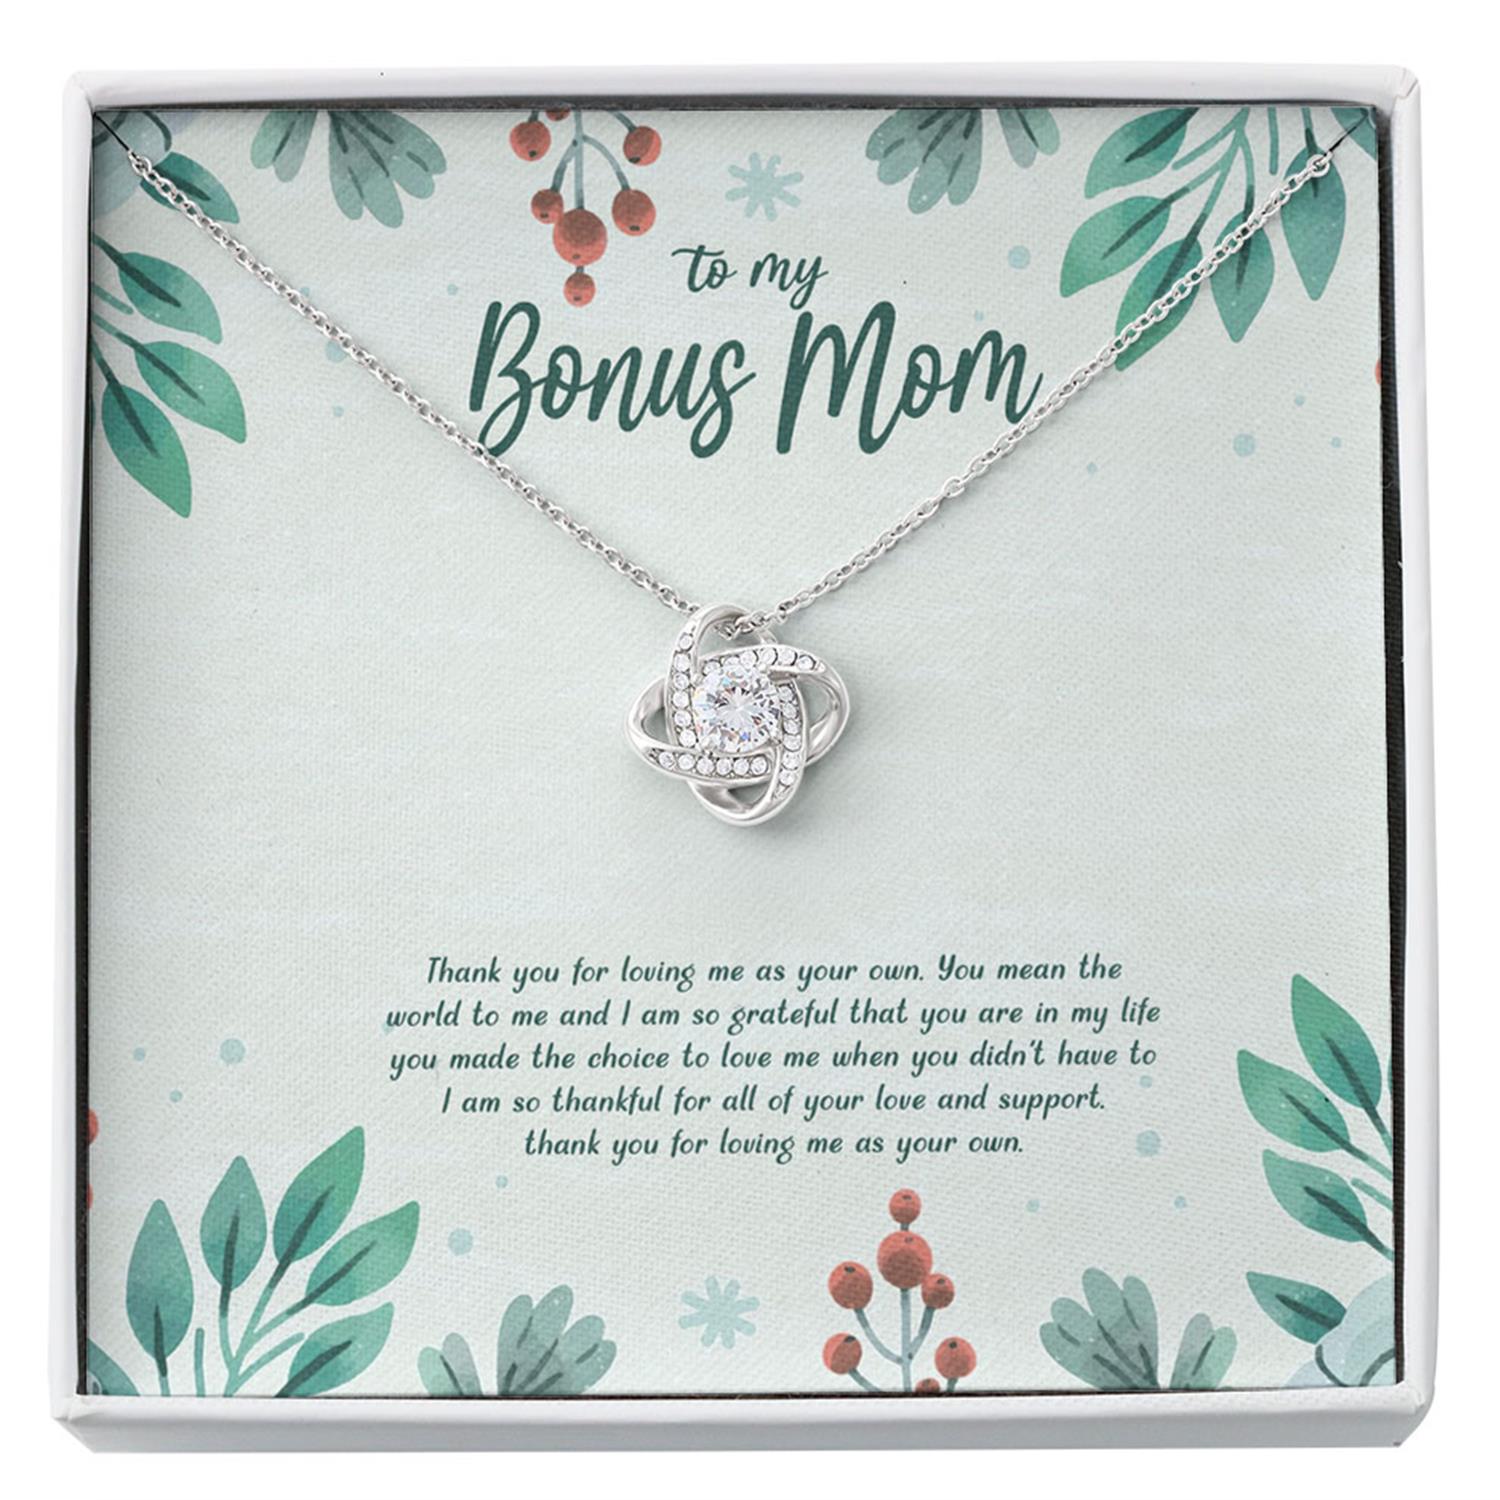 Mom Necklace, Mother-in-law Necklace, Stepmom Necklace, To My Bonus Mom Necklace Gift - Thank You For Loving Me As Your Own Custom Necklace